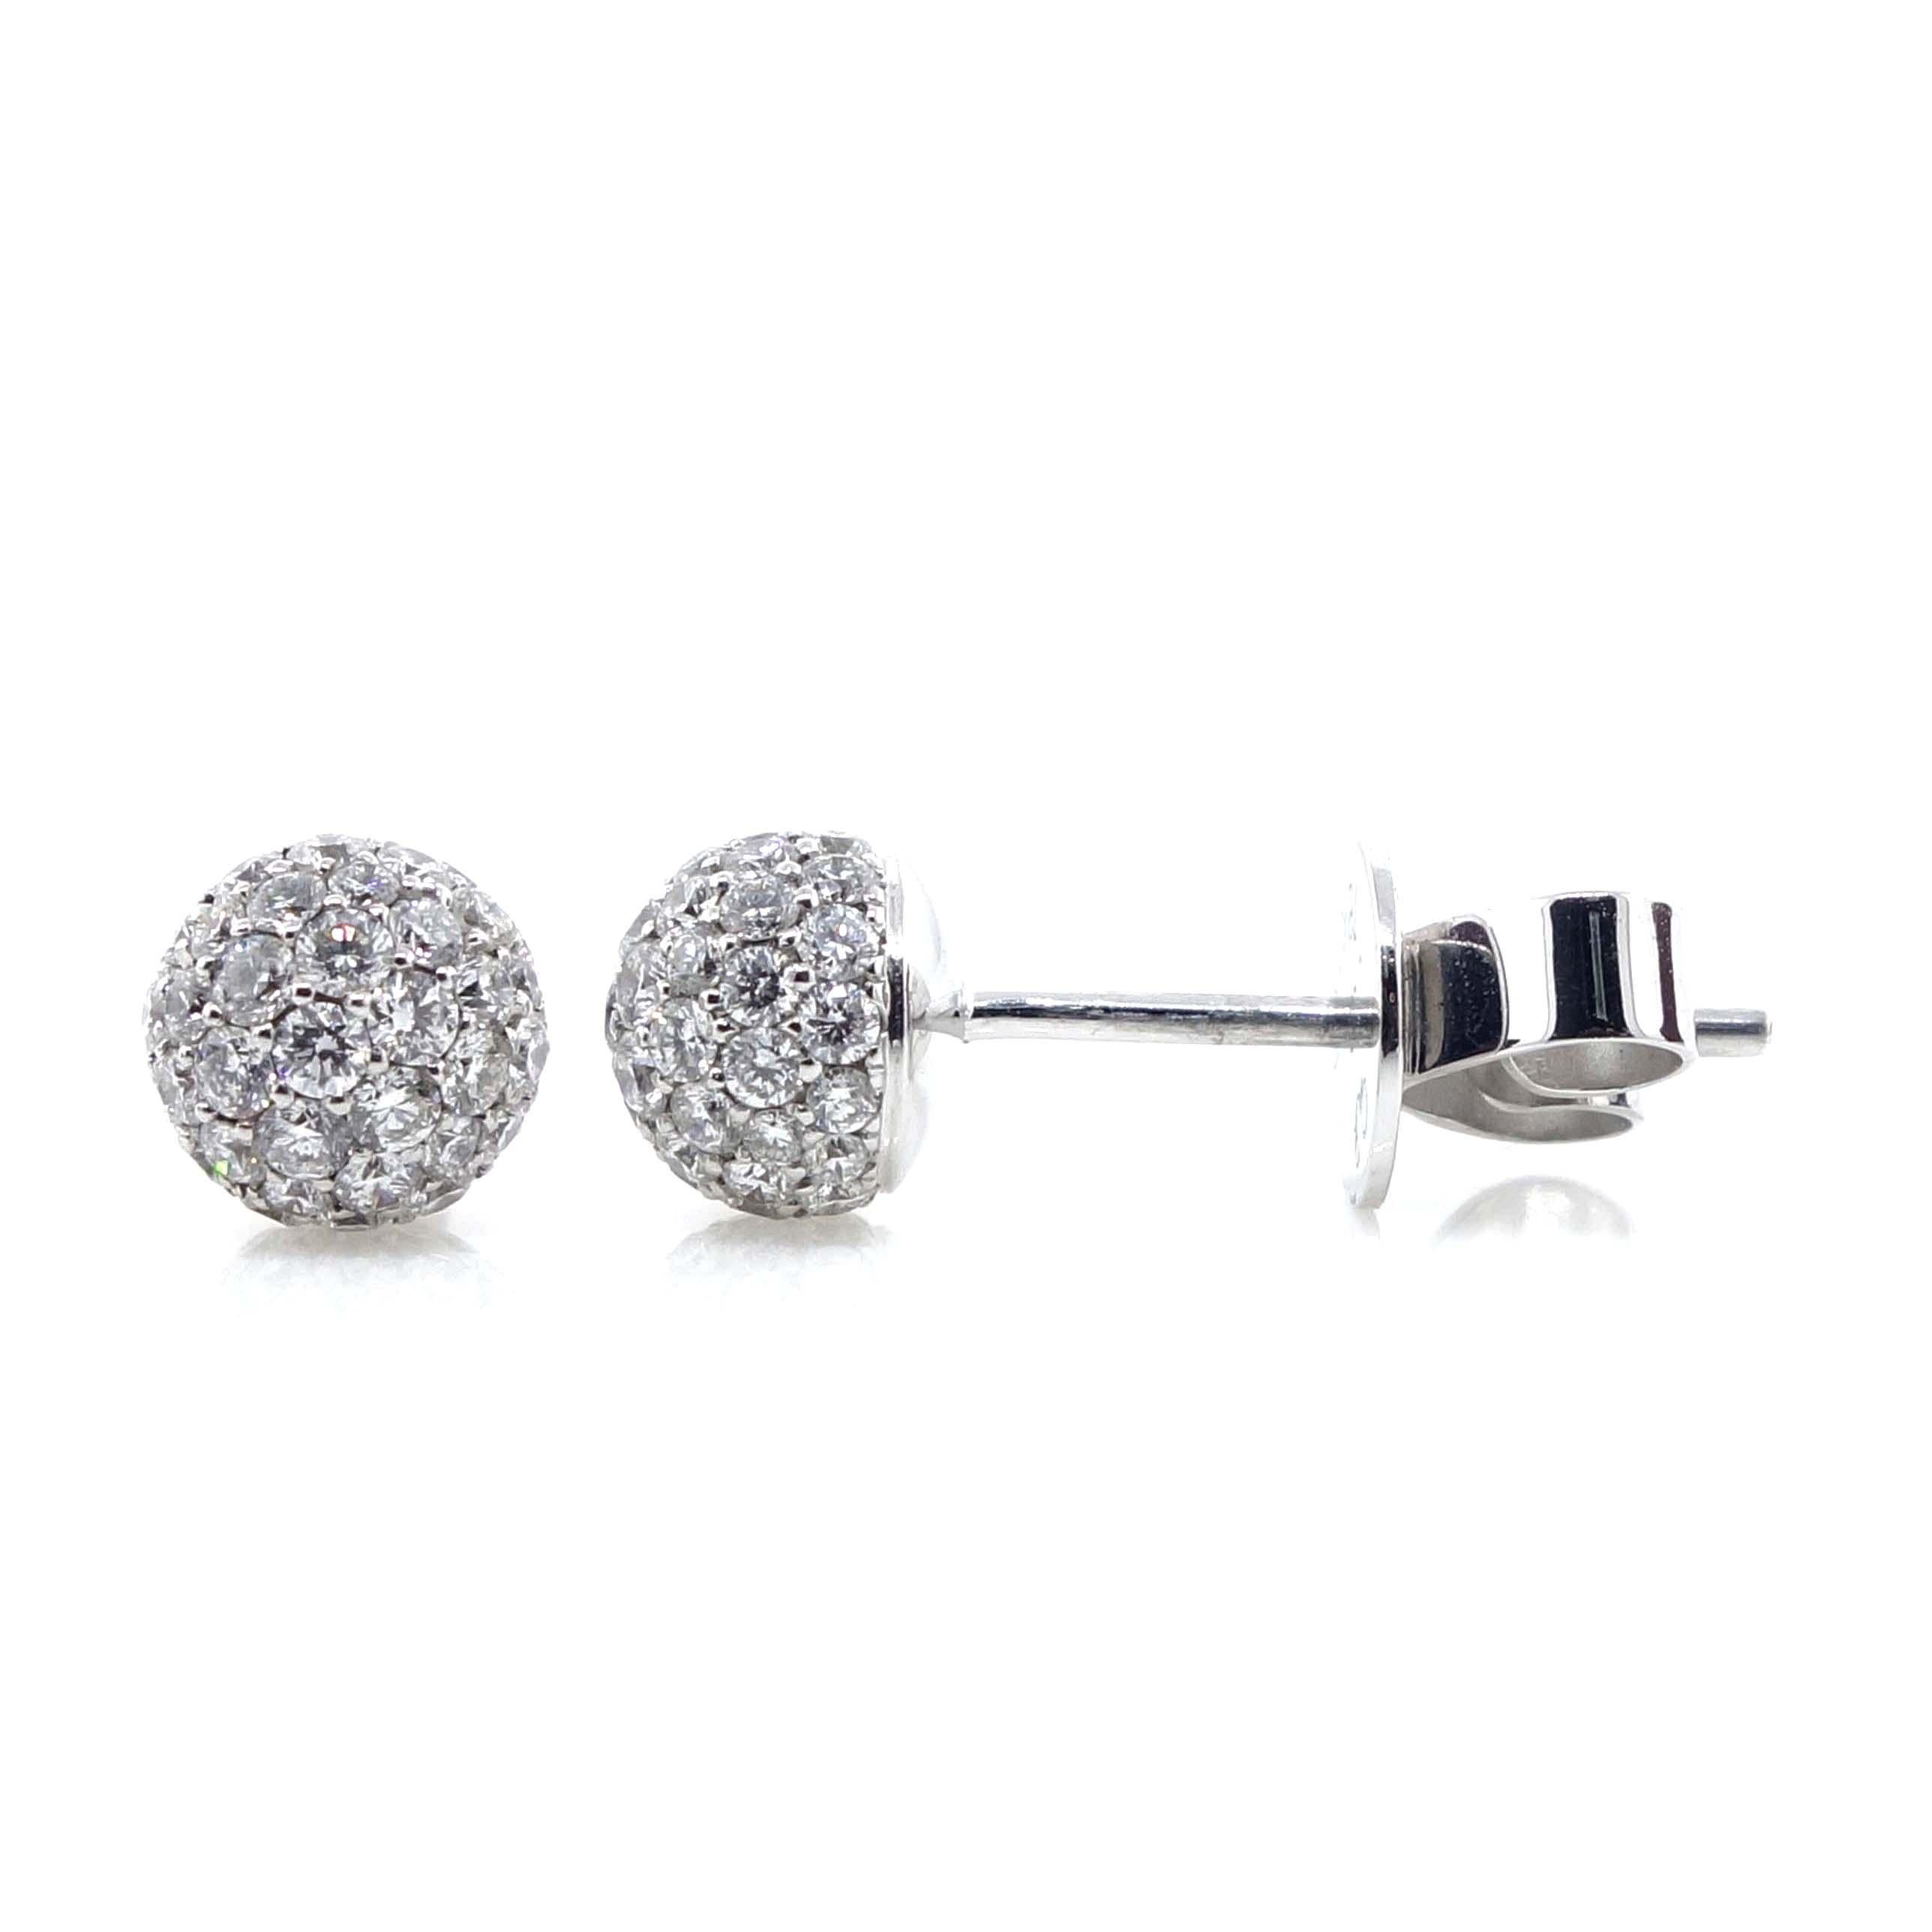 0.70 Carat Pave Earrings in 18k White Gold In New Condition For Sale In Houston, TX